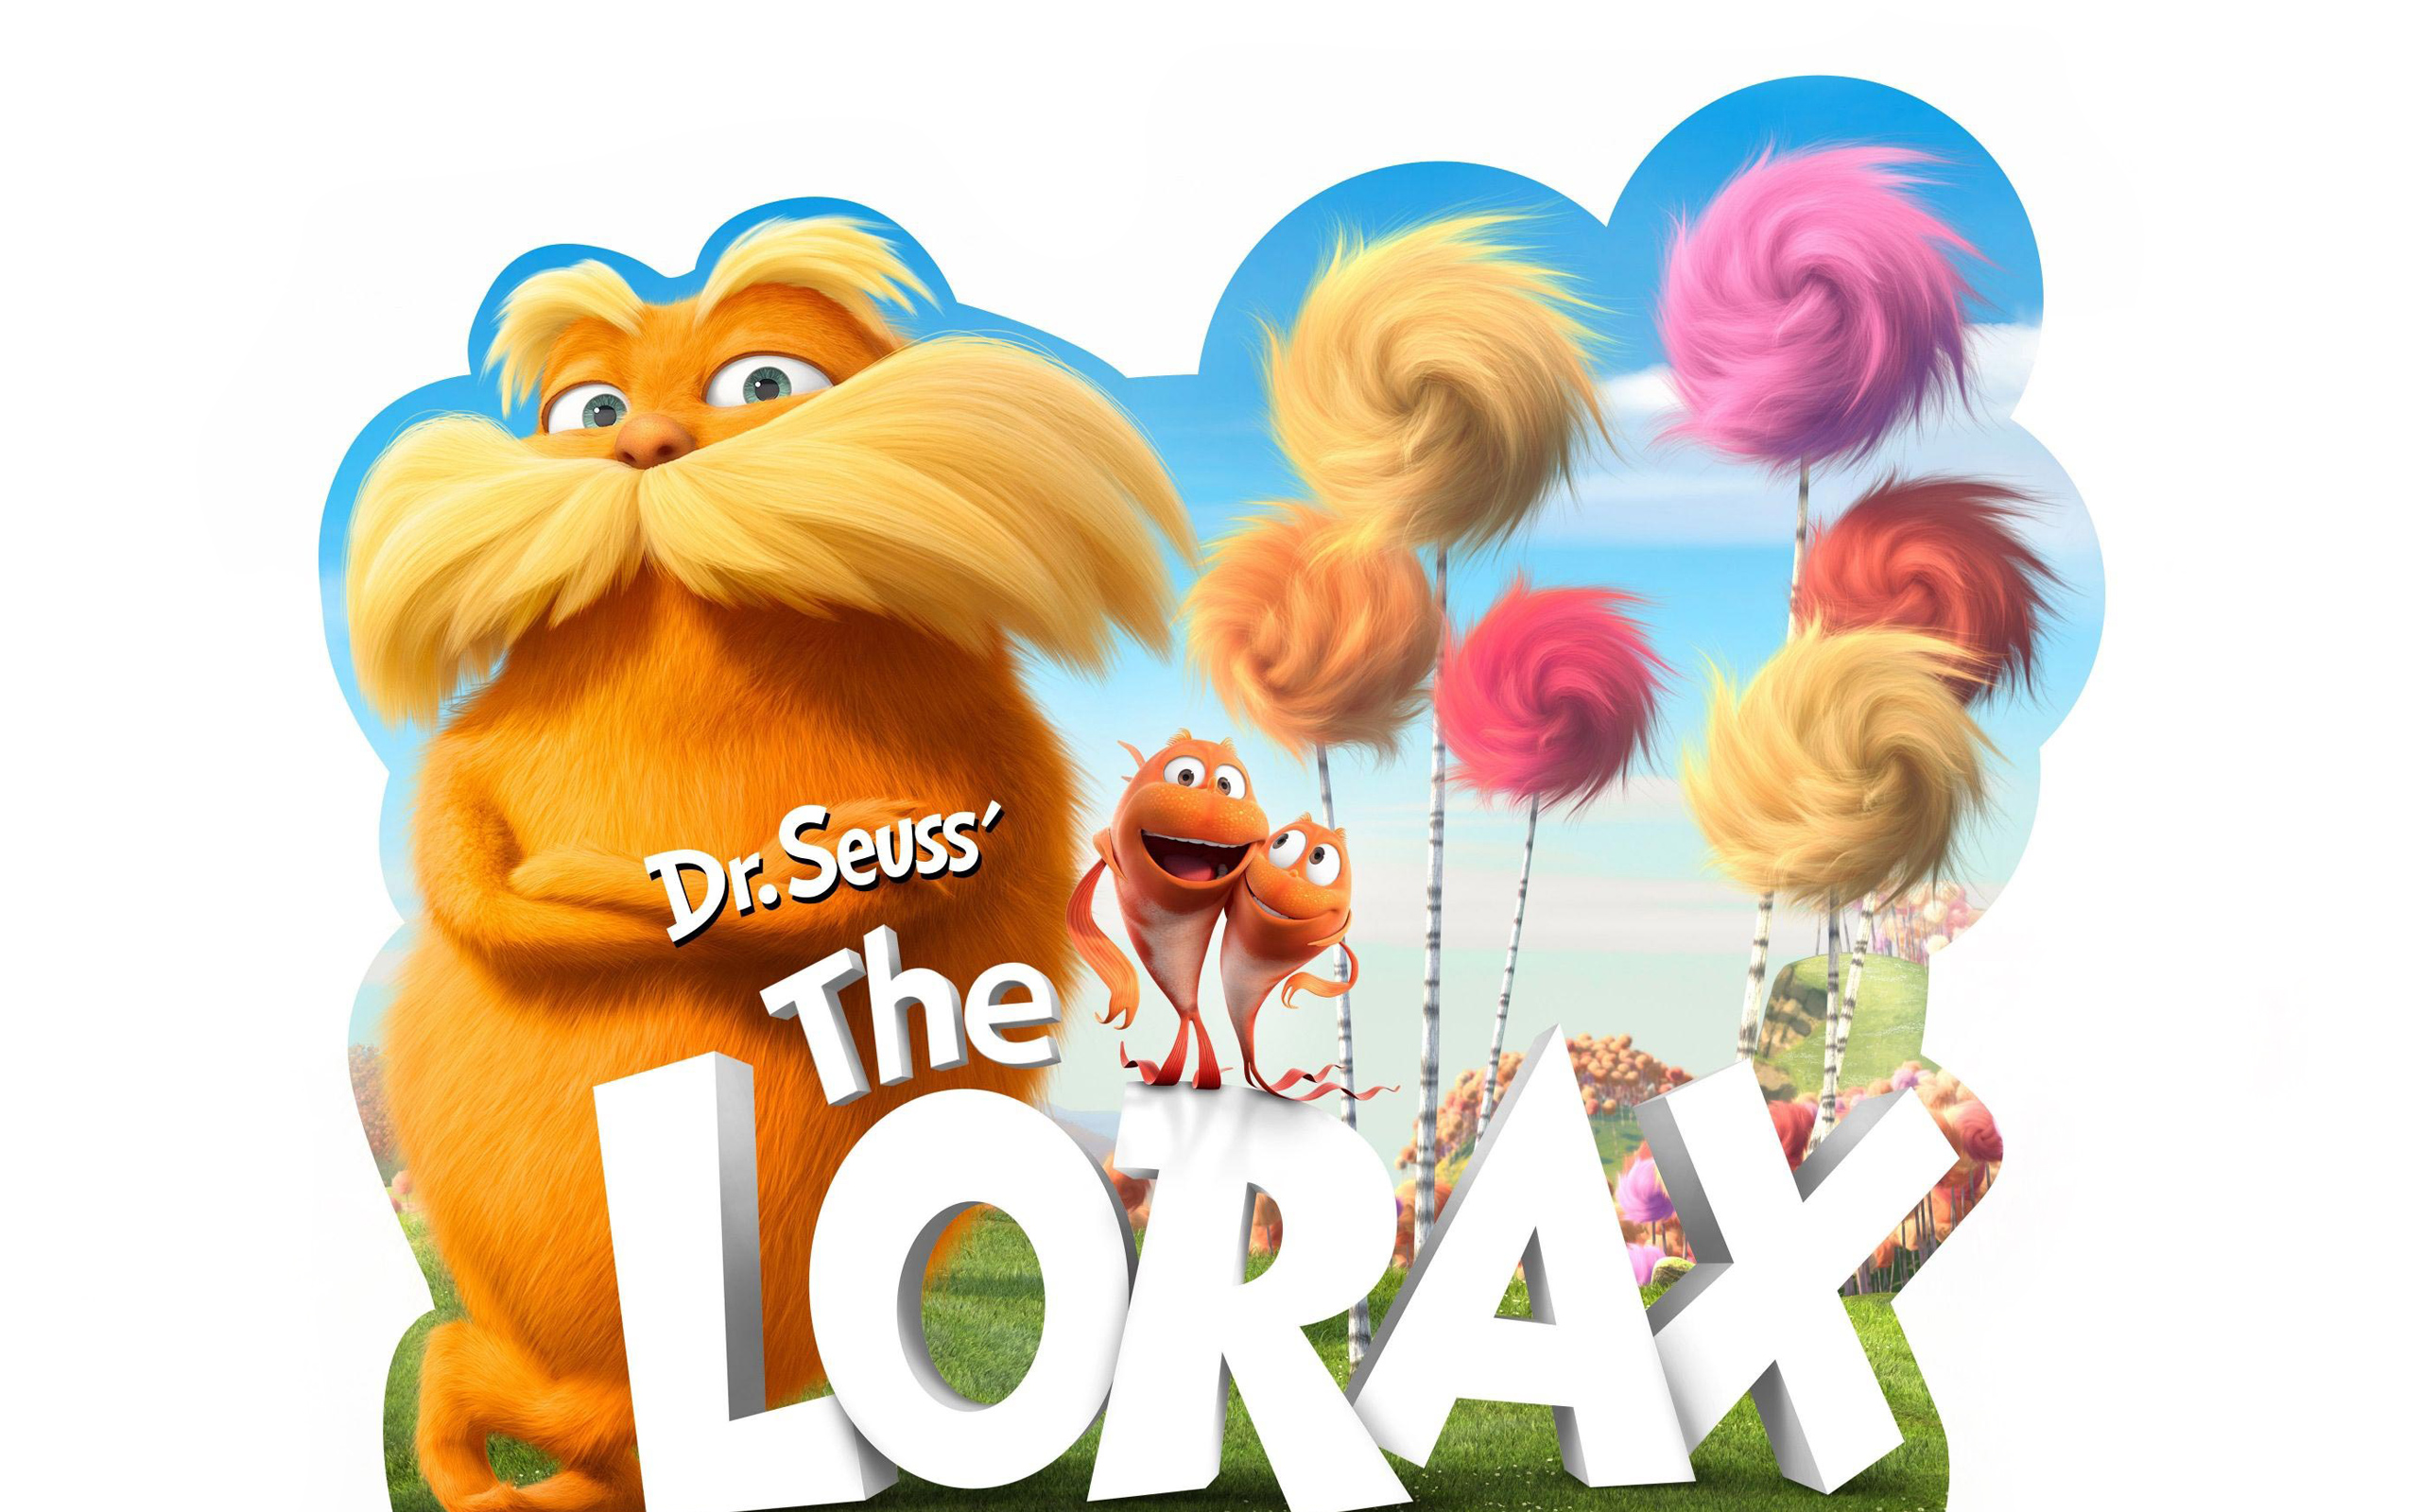 Movie In The Park Lorax Carlyle Illinois Lake